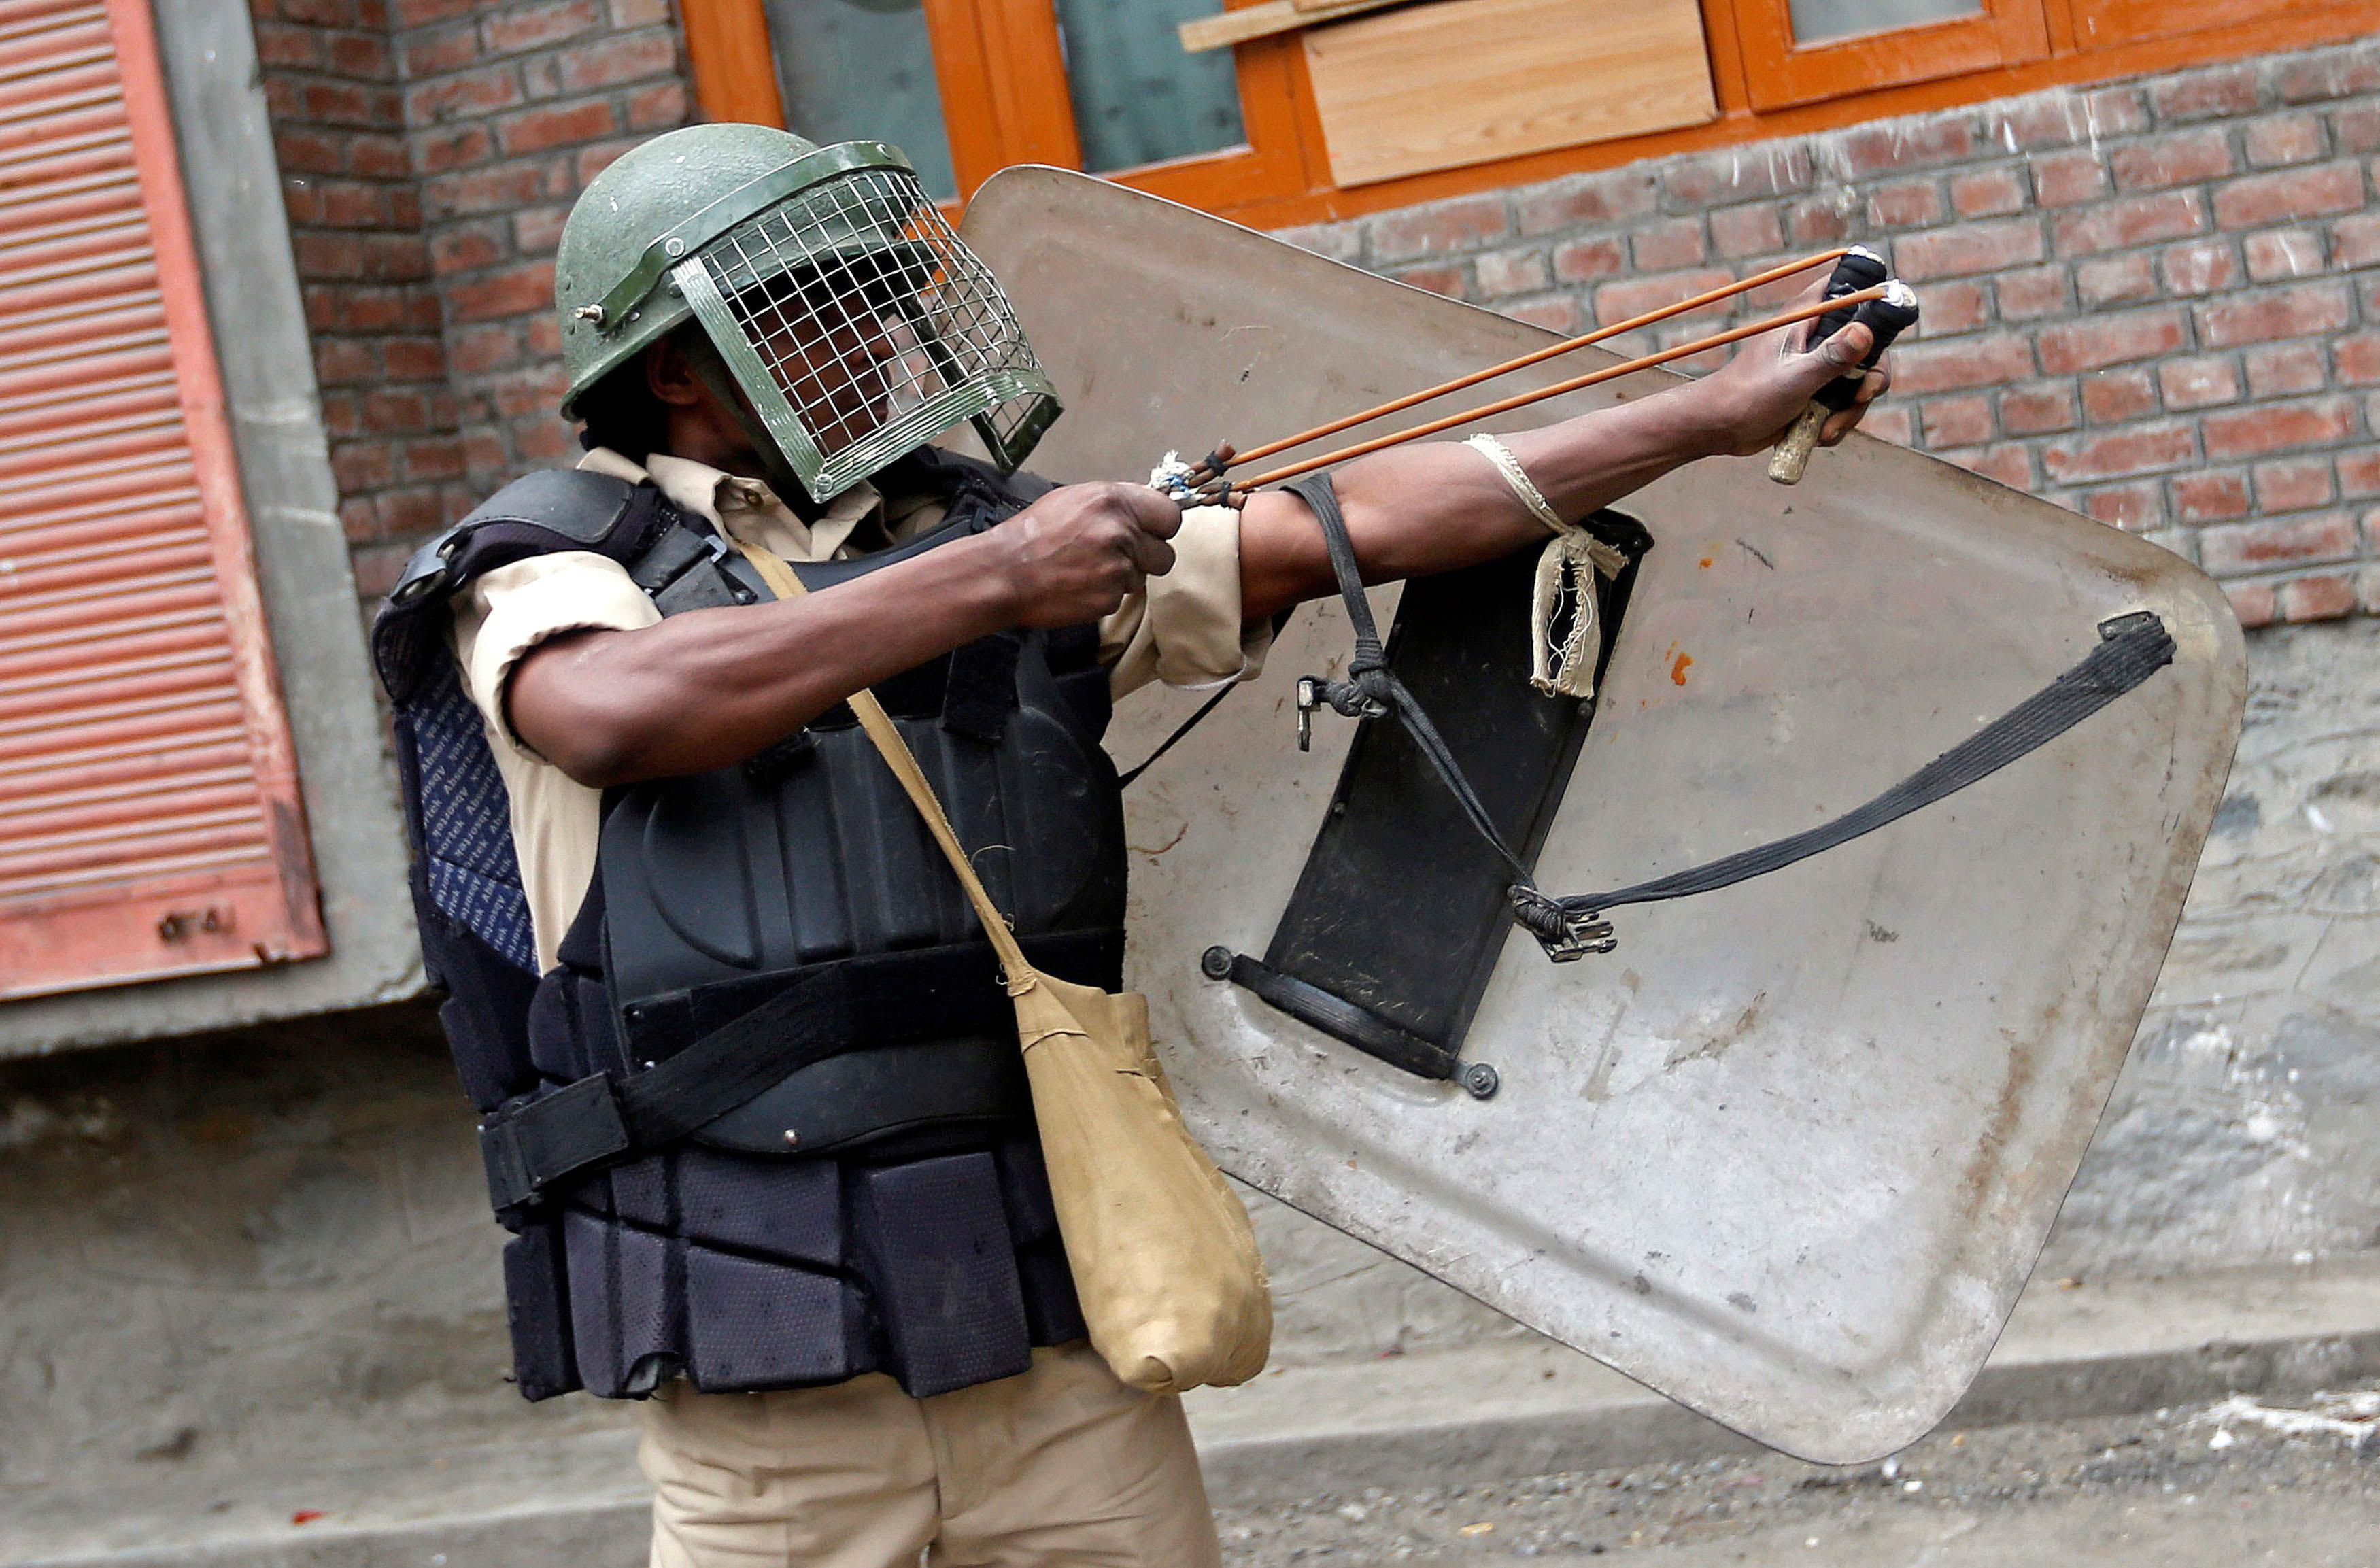 An Indian policeman uses a slingshot during clashes with demonstrators following a protest in Srinag